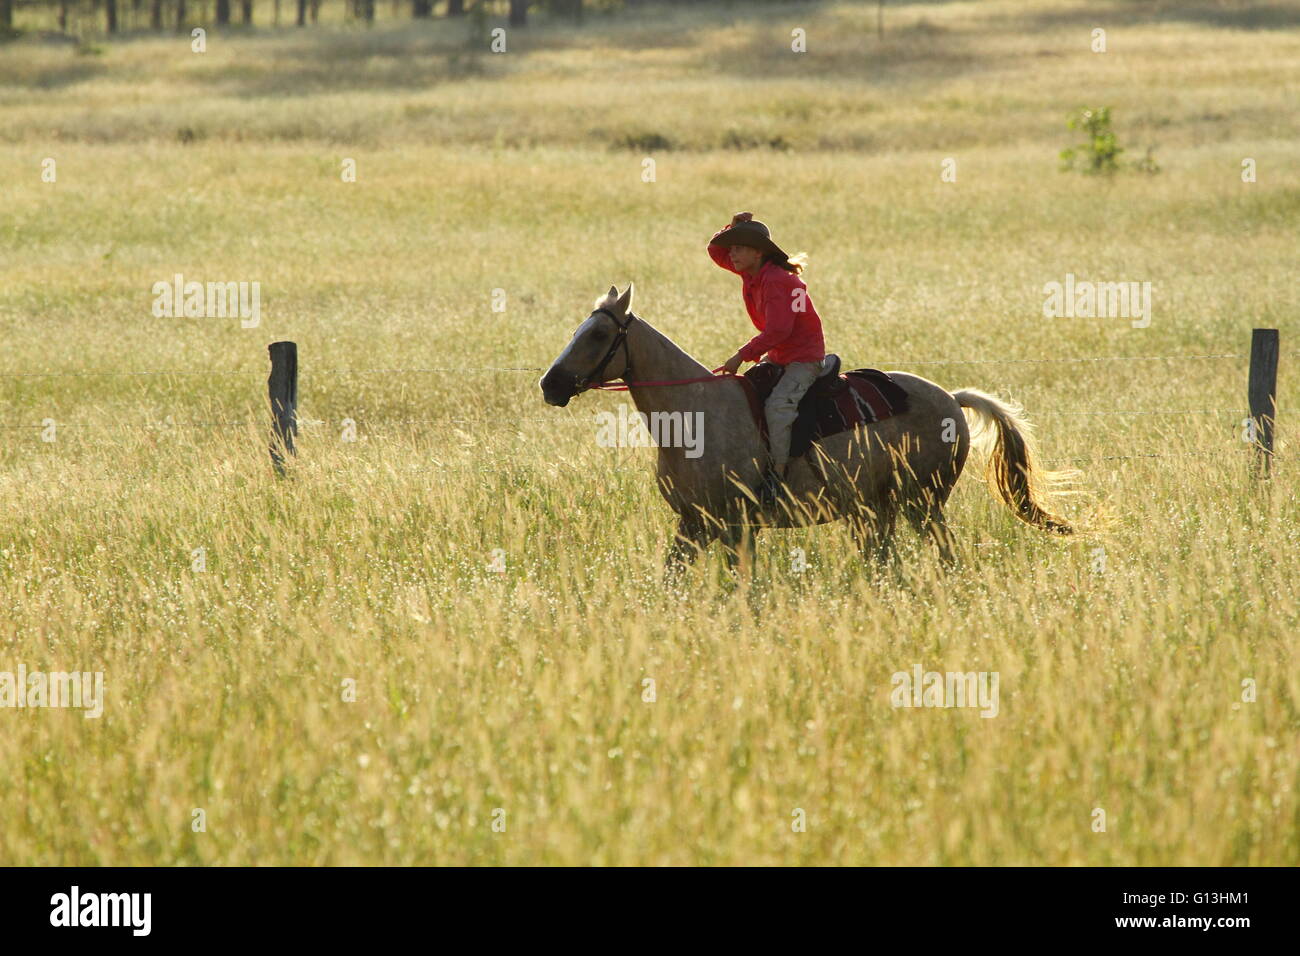 A young pre-teen girl holding onto hat and riding fast on her horse near Eidsvold, Queensland, Australia during a cattle drive. Stock Photo